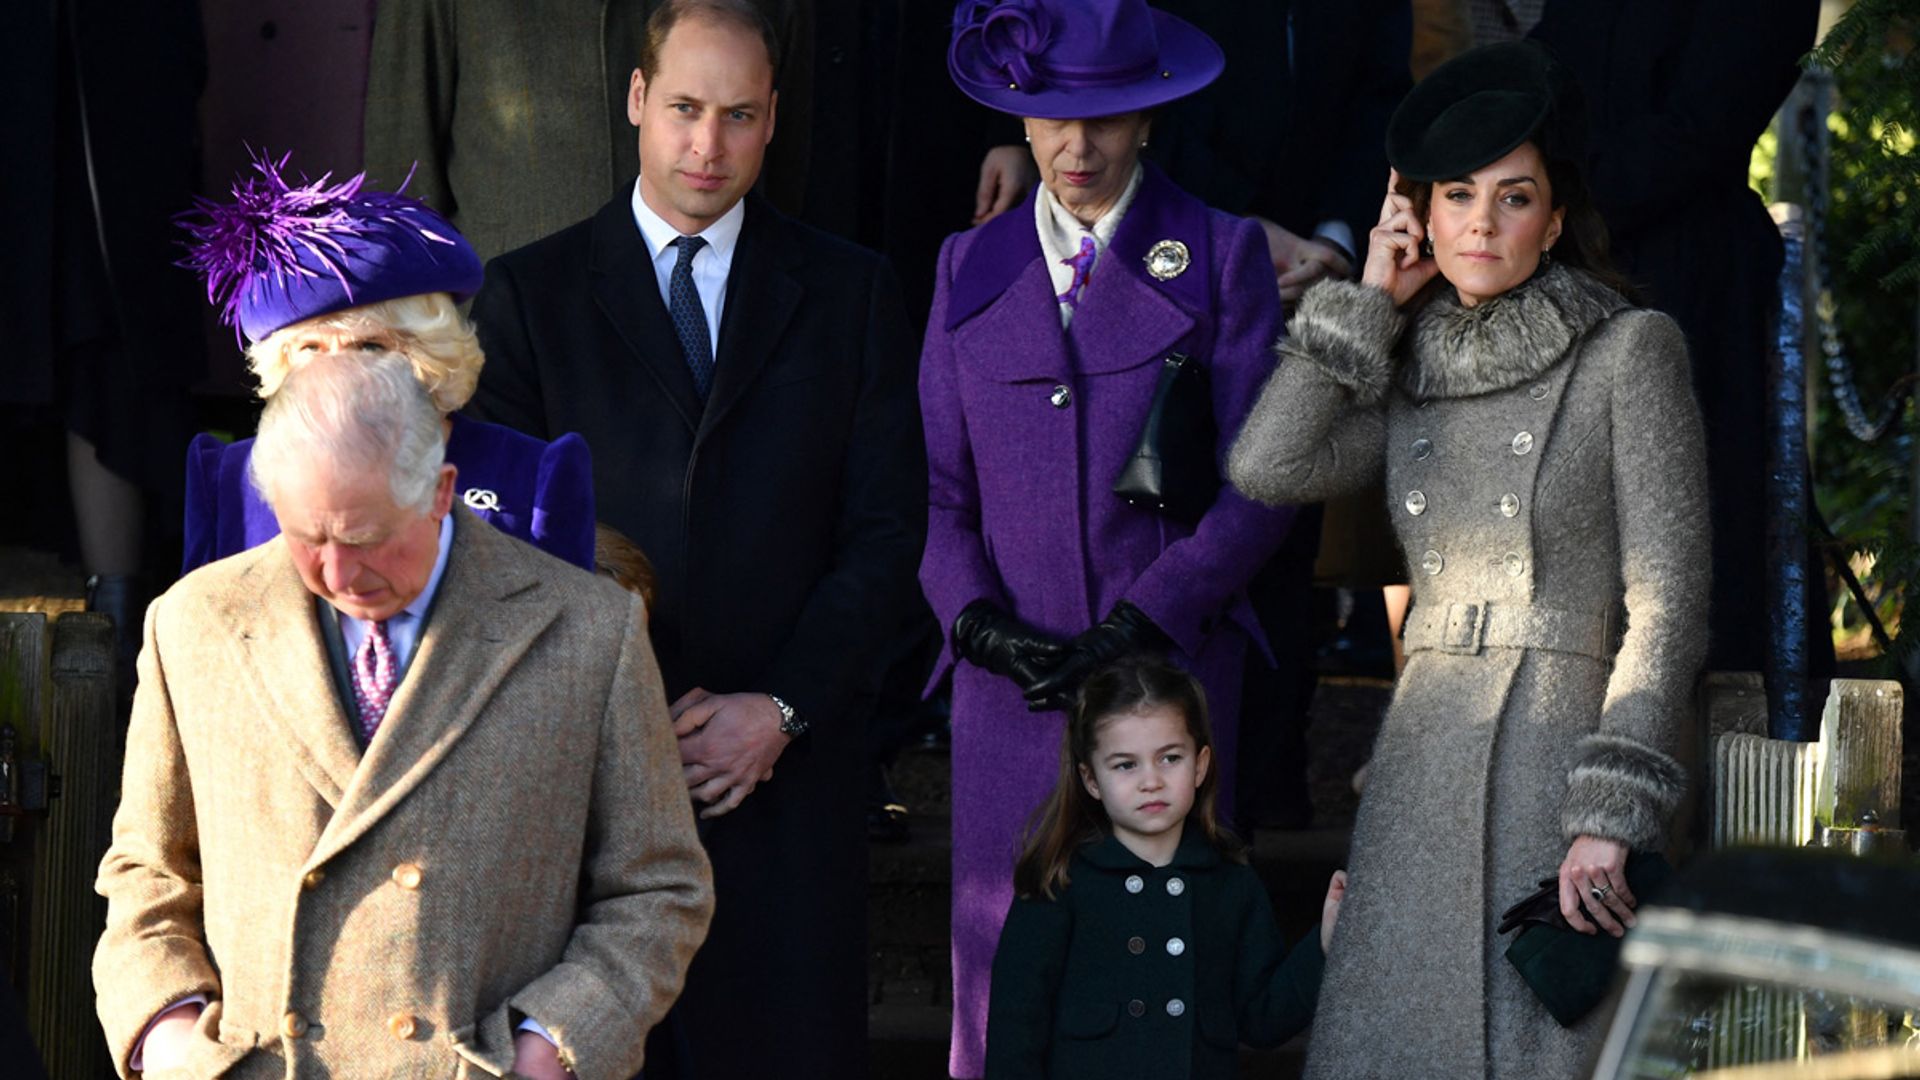 Inside the royal family’s heartbreaking first Christmas without the Queen